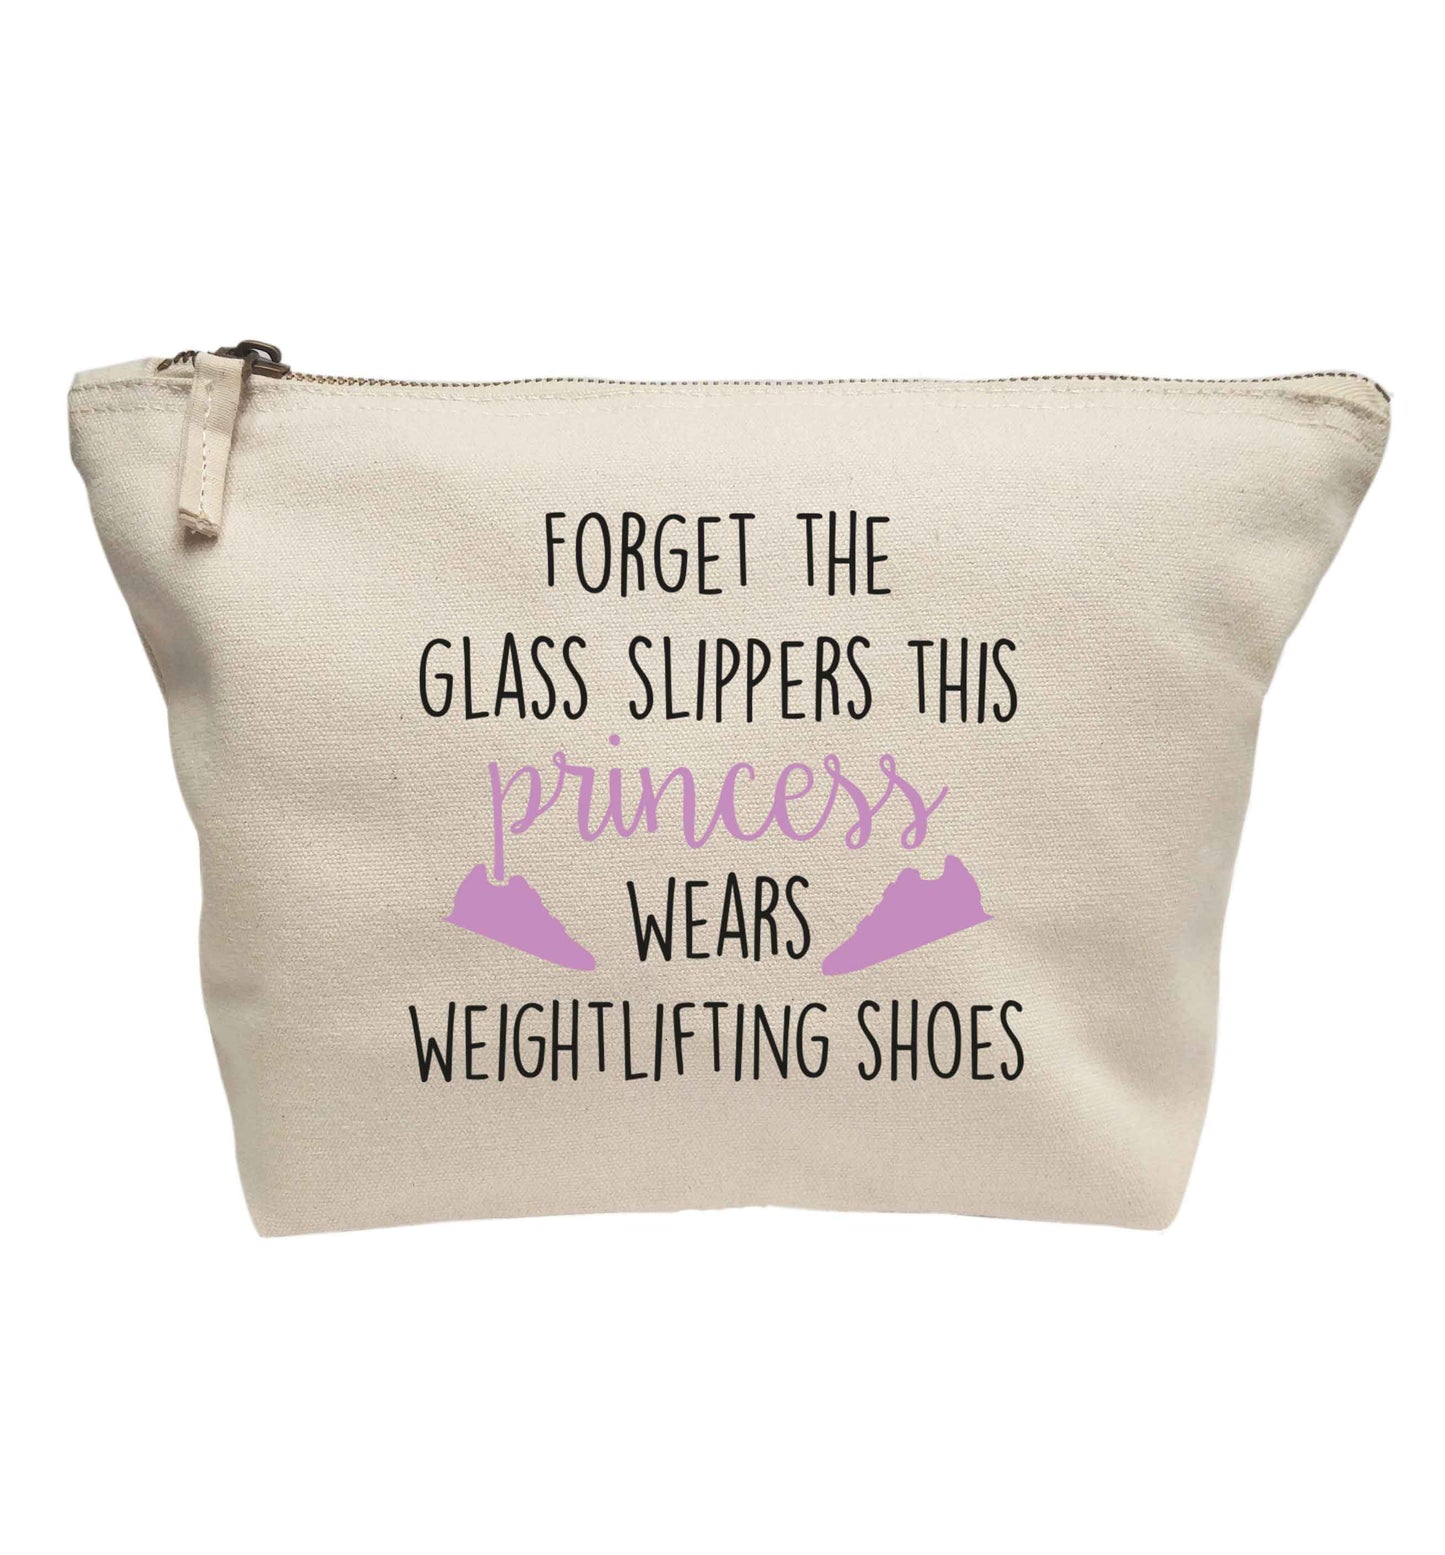 Forget the glass slippers this princess wears weightlifting shoes | makeup / wash bag